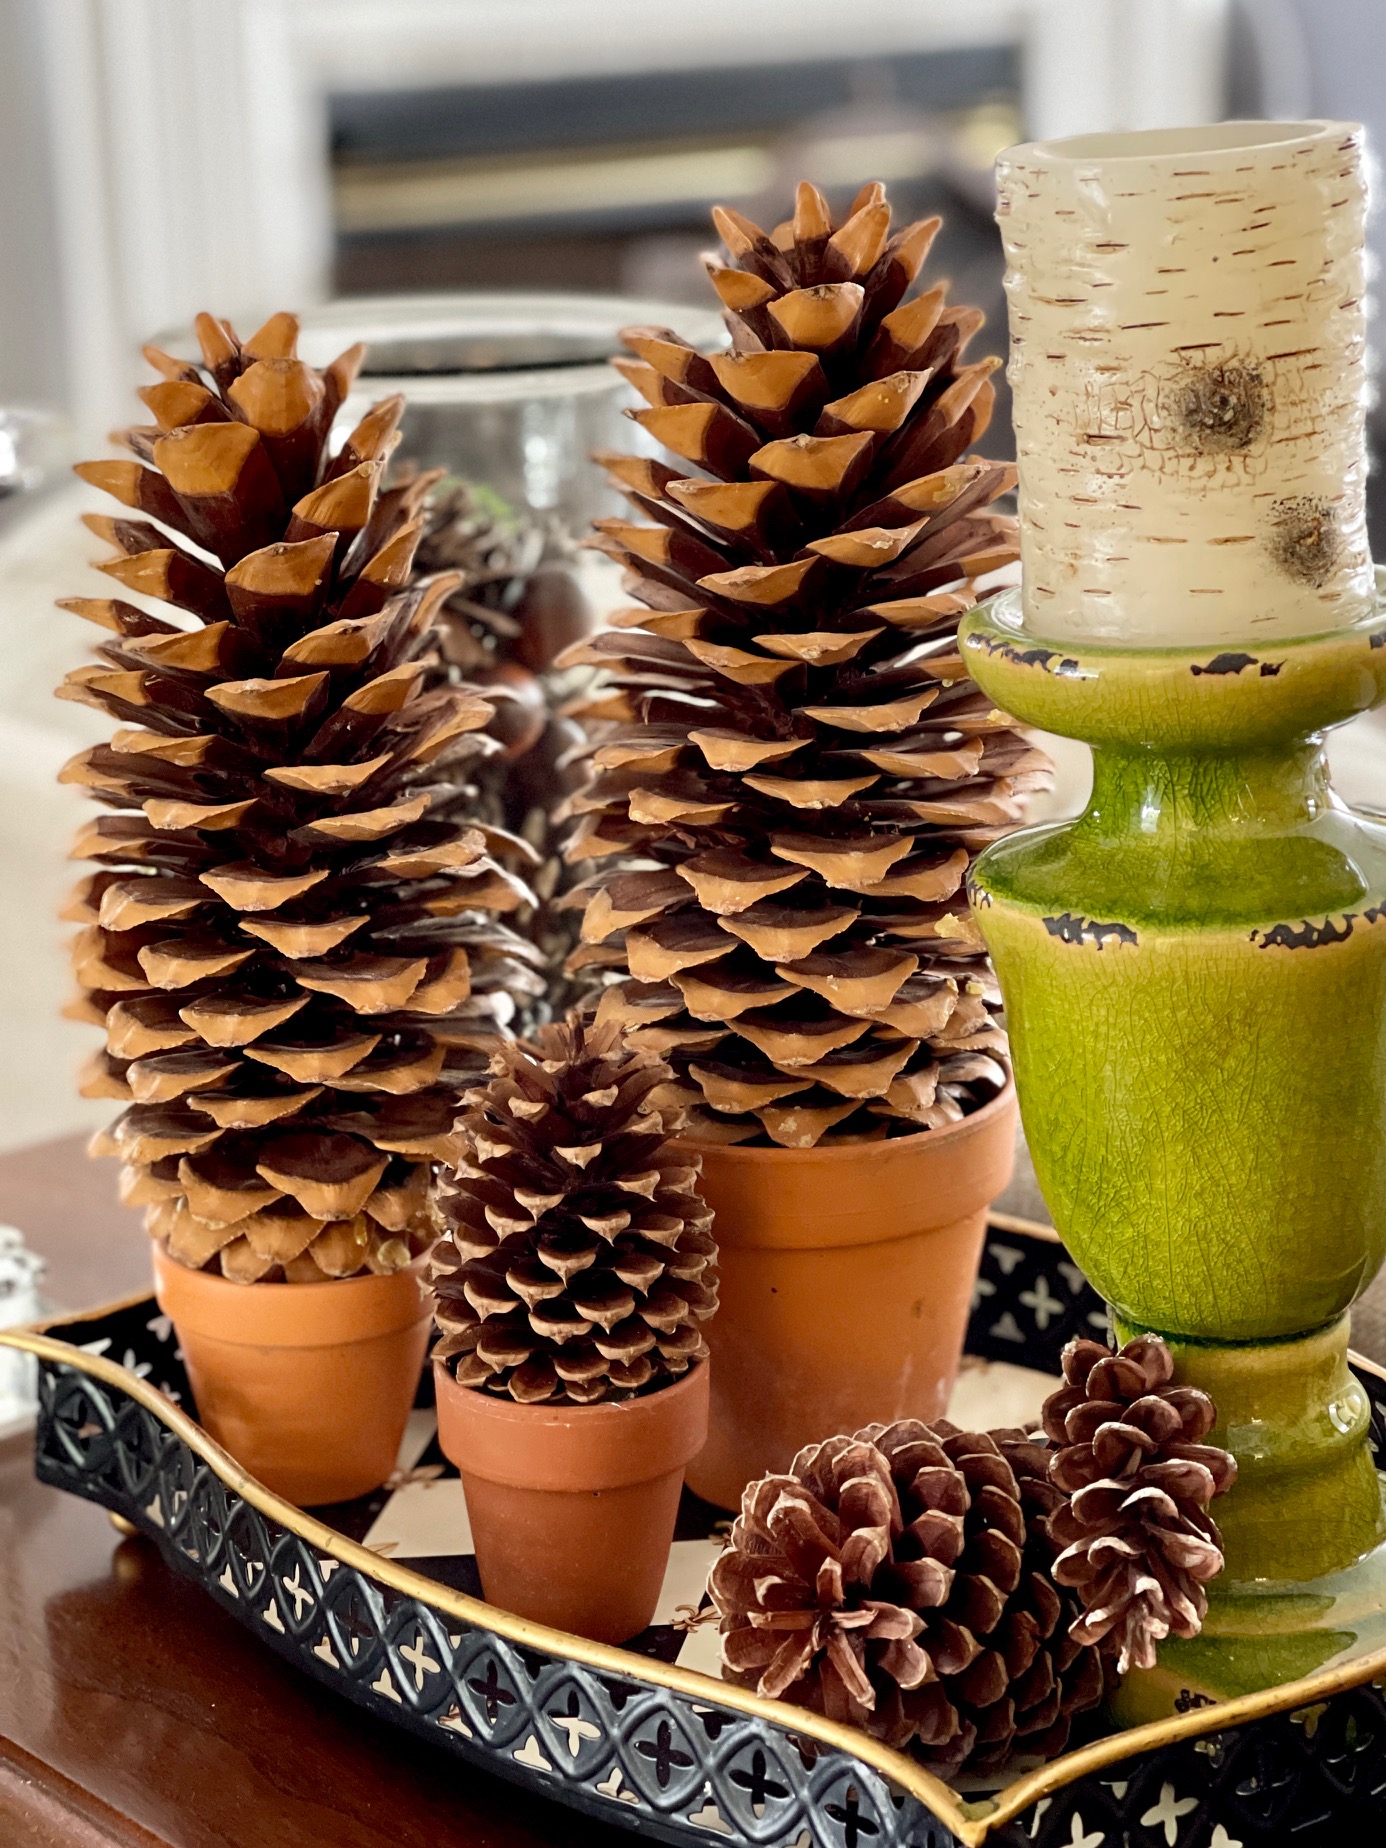 32 Festive Ideas for Decorating with Pinecones